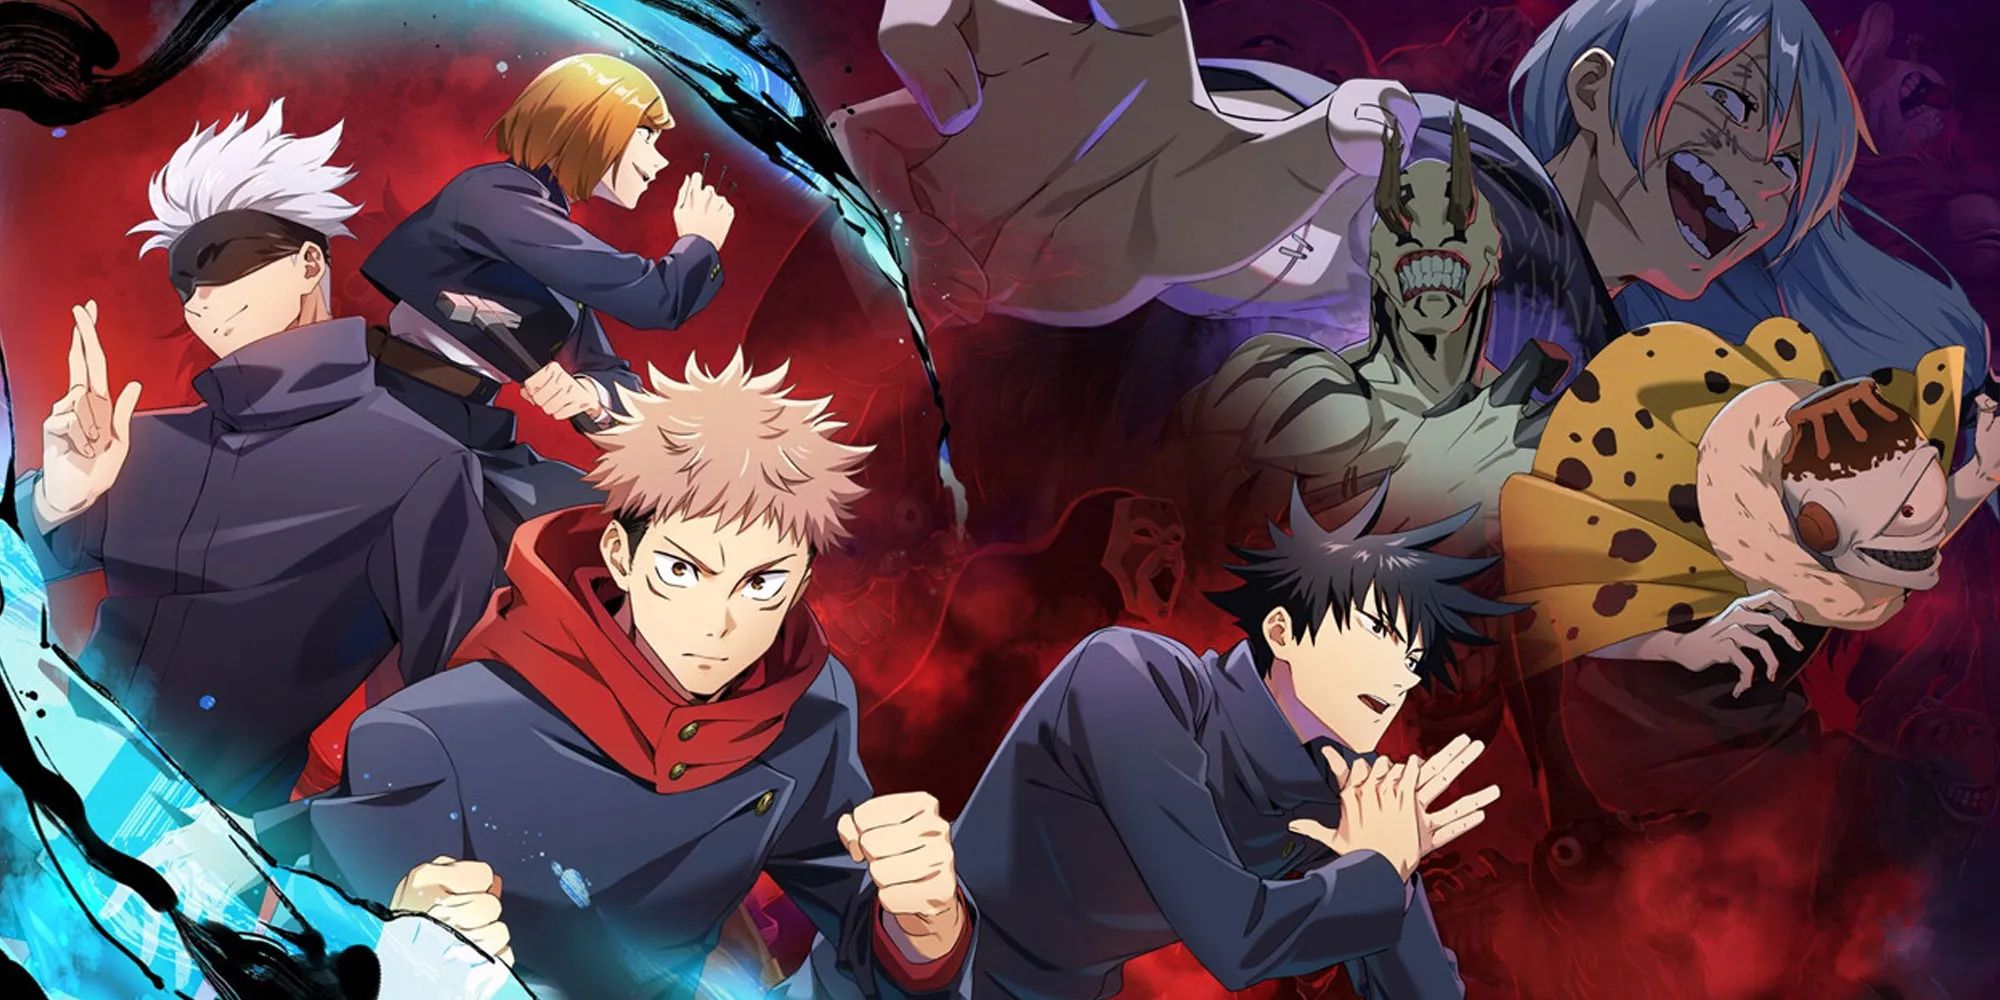 Rumored Fortnite Anime Crossover Is Apparrently Jujutsu Kaisen, Not One Piece